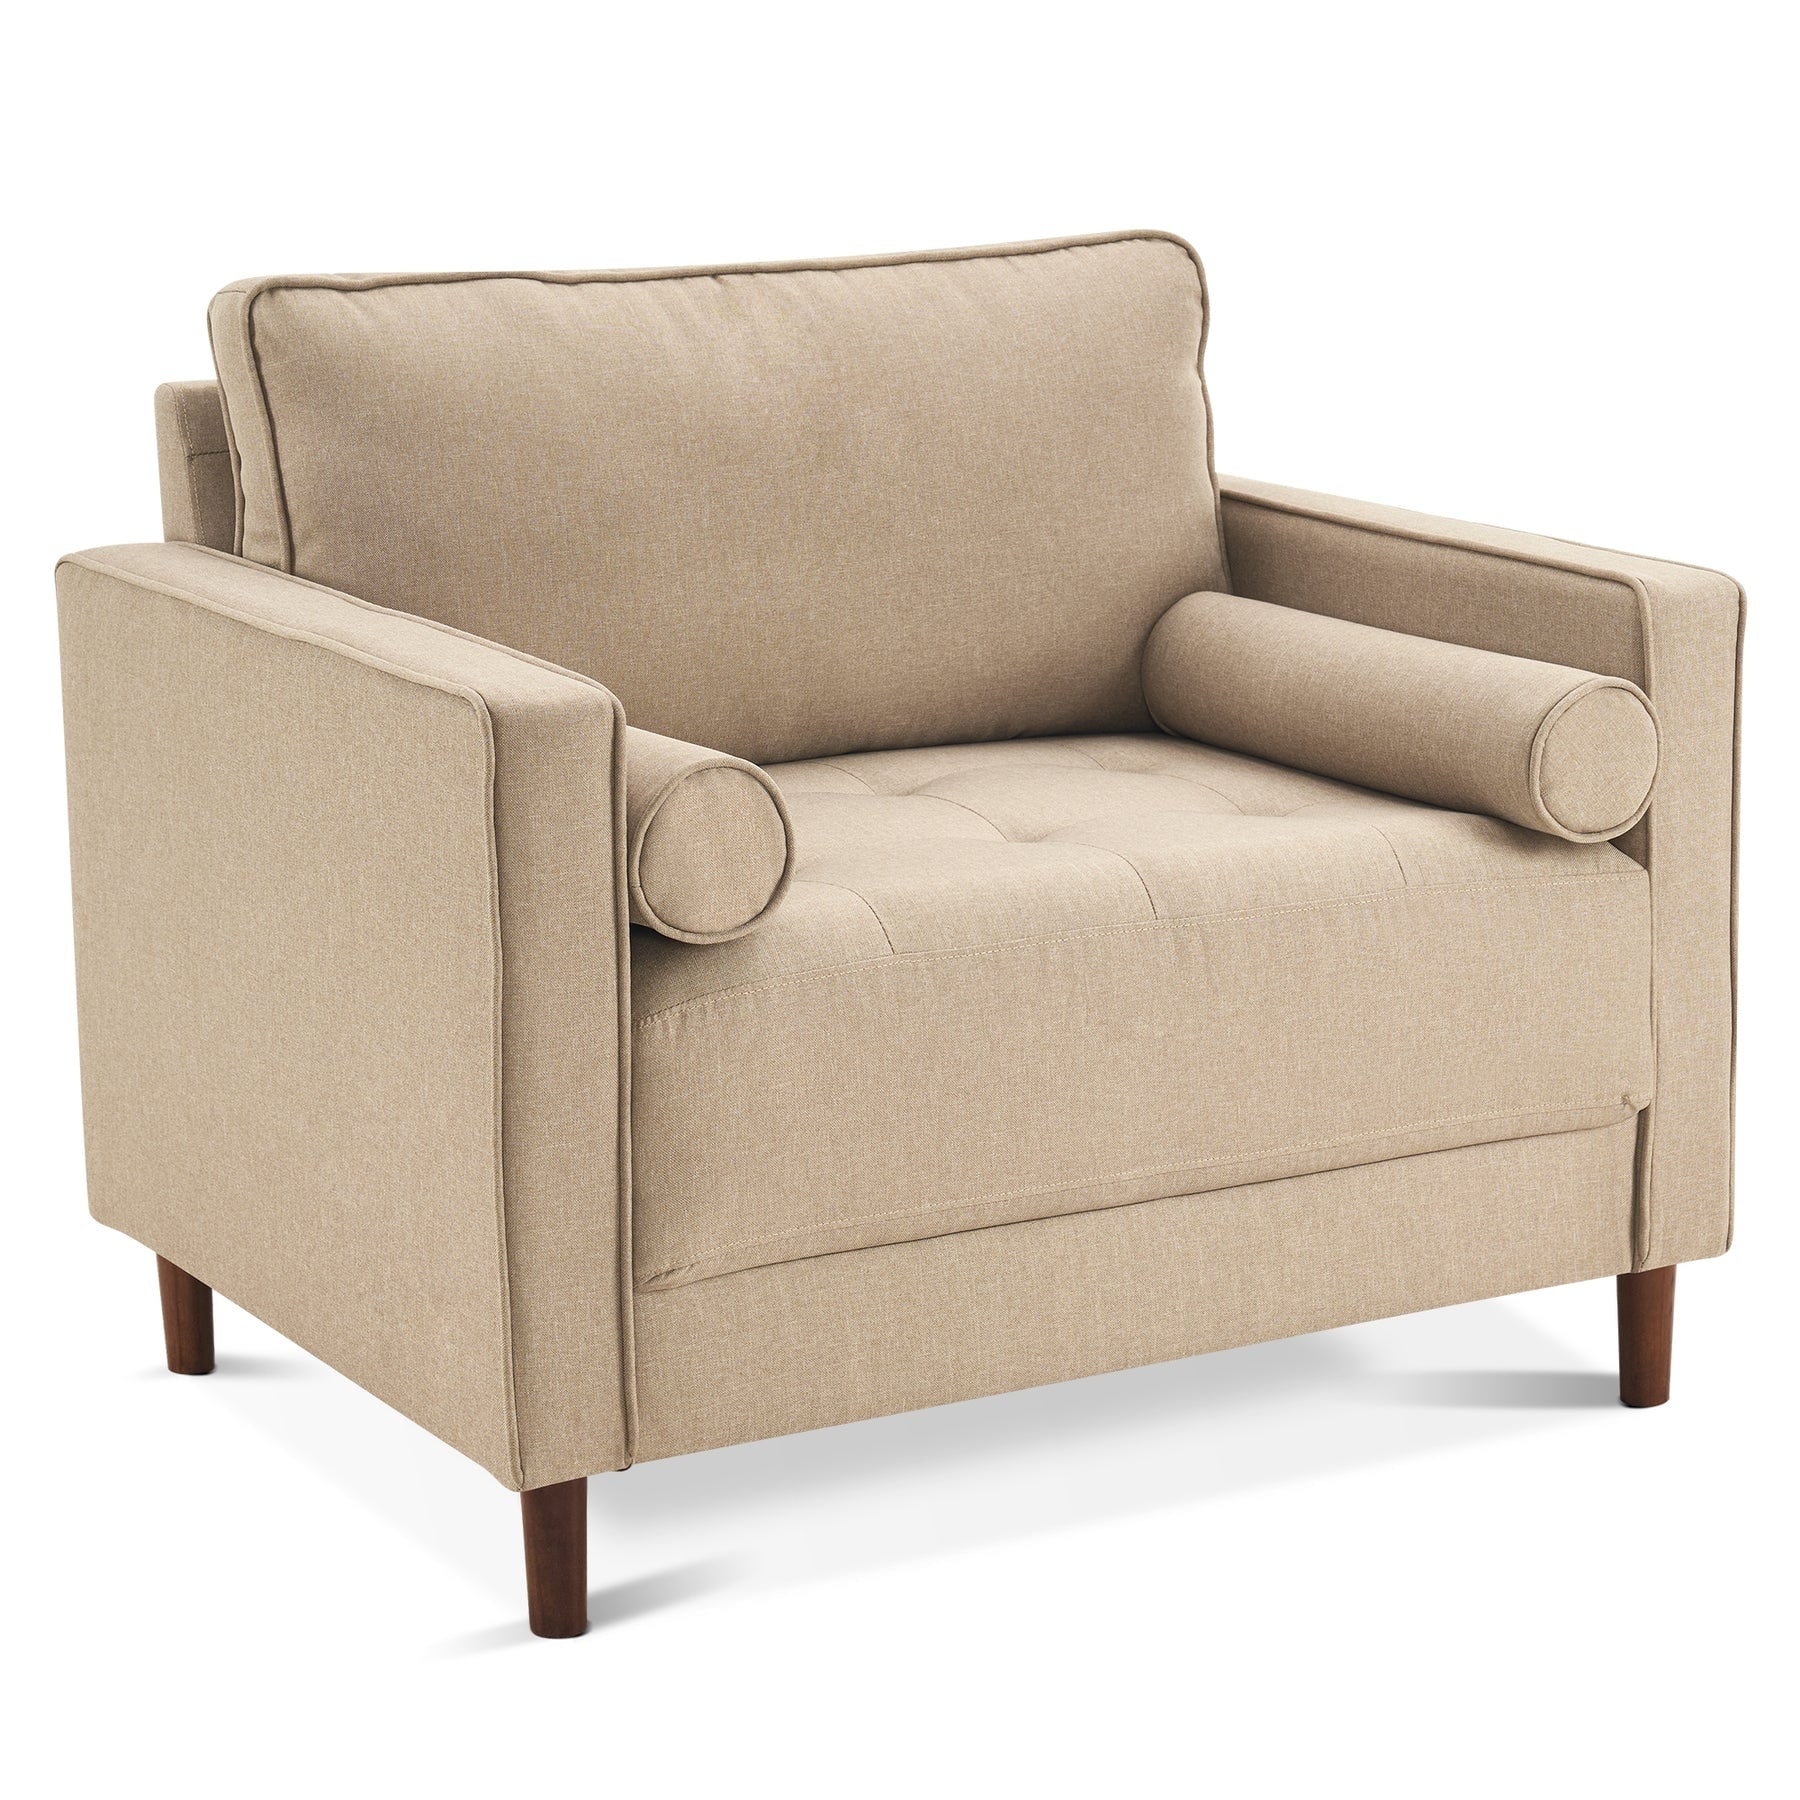 Mcombo Accent Chair, Linen Lounge Sofa Couch with Pillows, Large Club Armchair for Living Room Bedroom